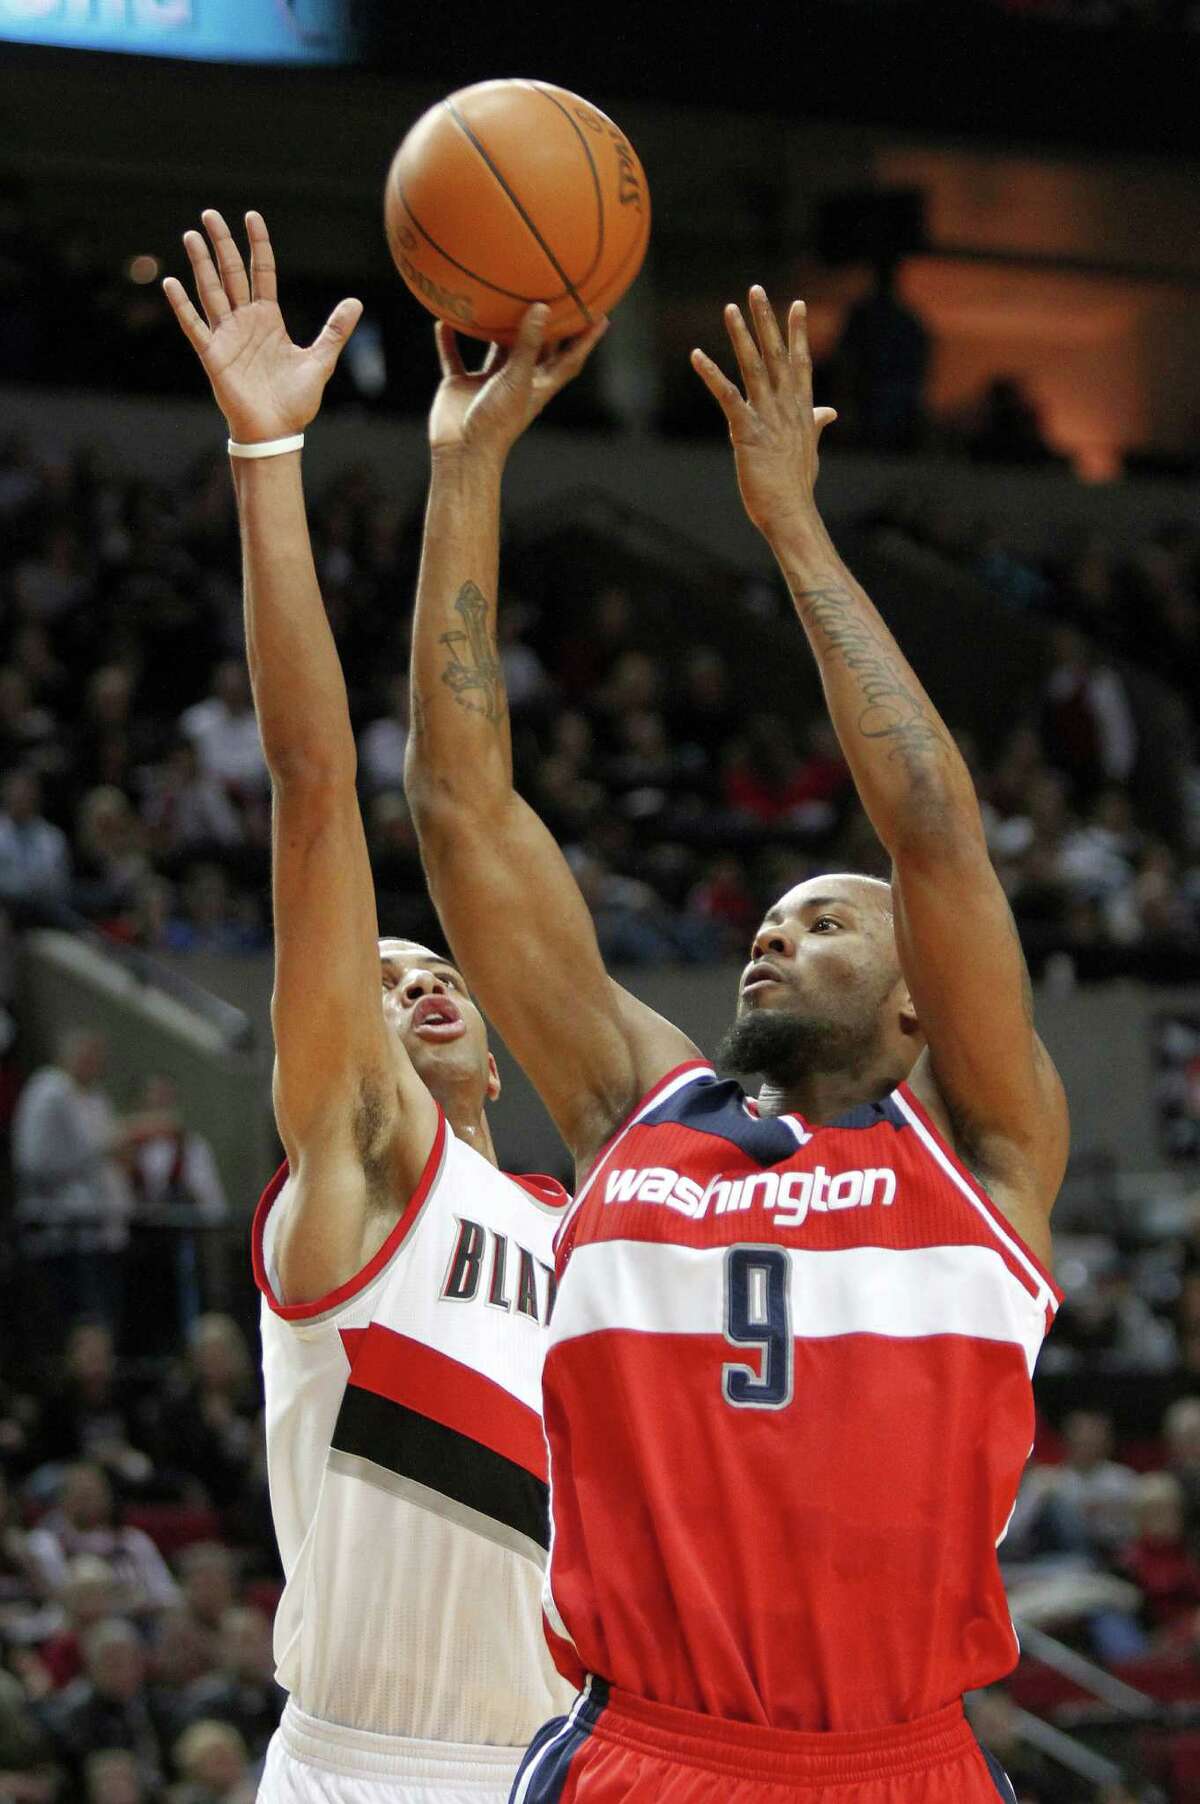 The Wizards saved themselves from spending $13.7 million in a buyout by instead trading Rashard Lewis (right) to the Hornets.